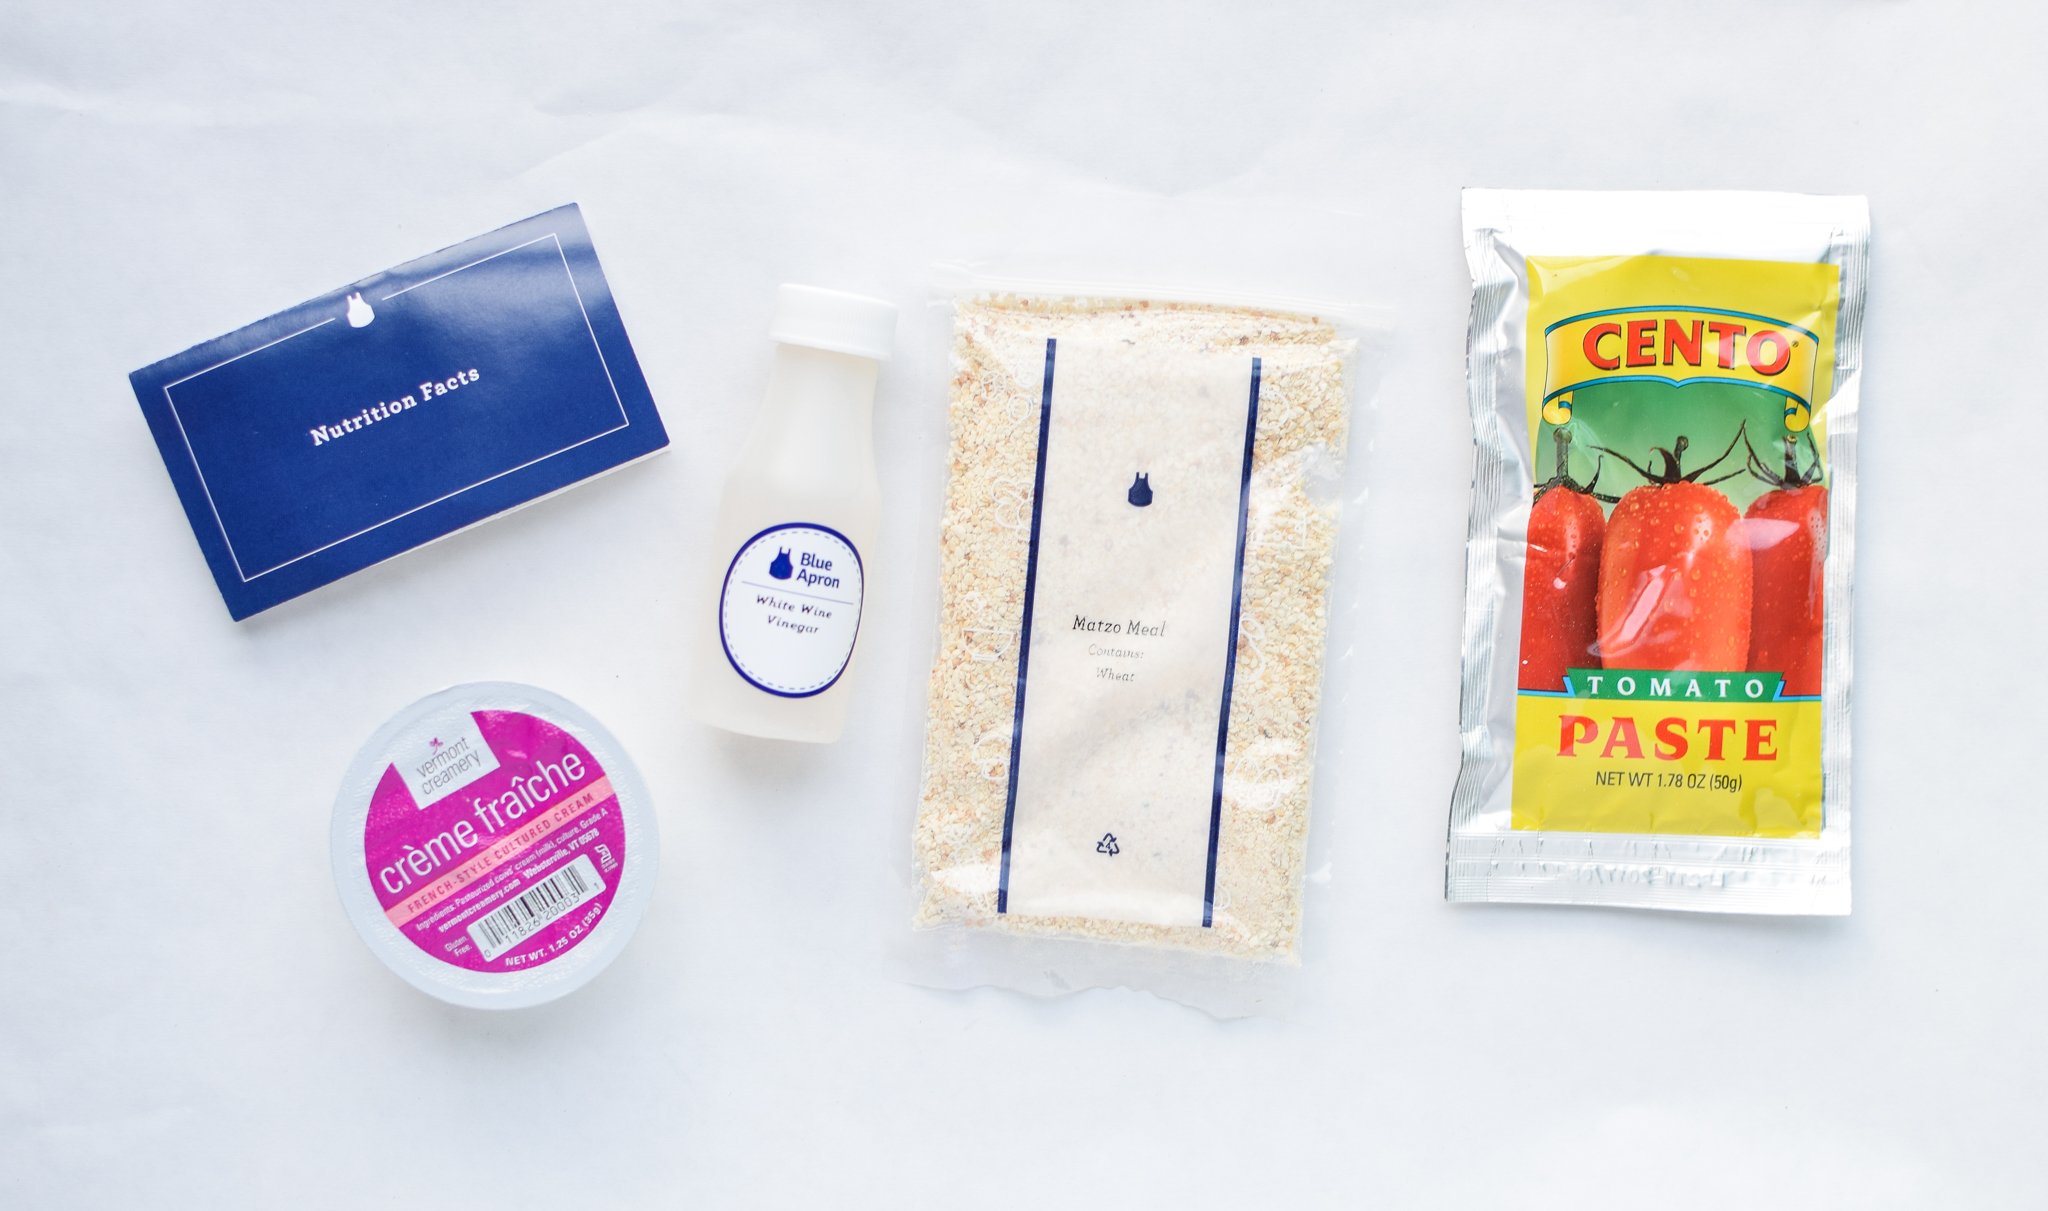 Blue Apron Meal Delivery Service Review - Pictures and discussion on the popular meal delivery service Blue Apron. - ProjectMealPlan.com